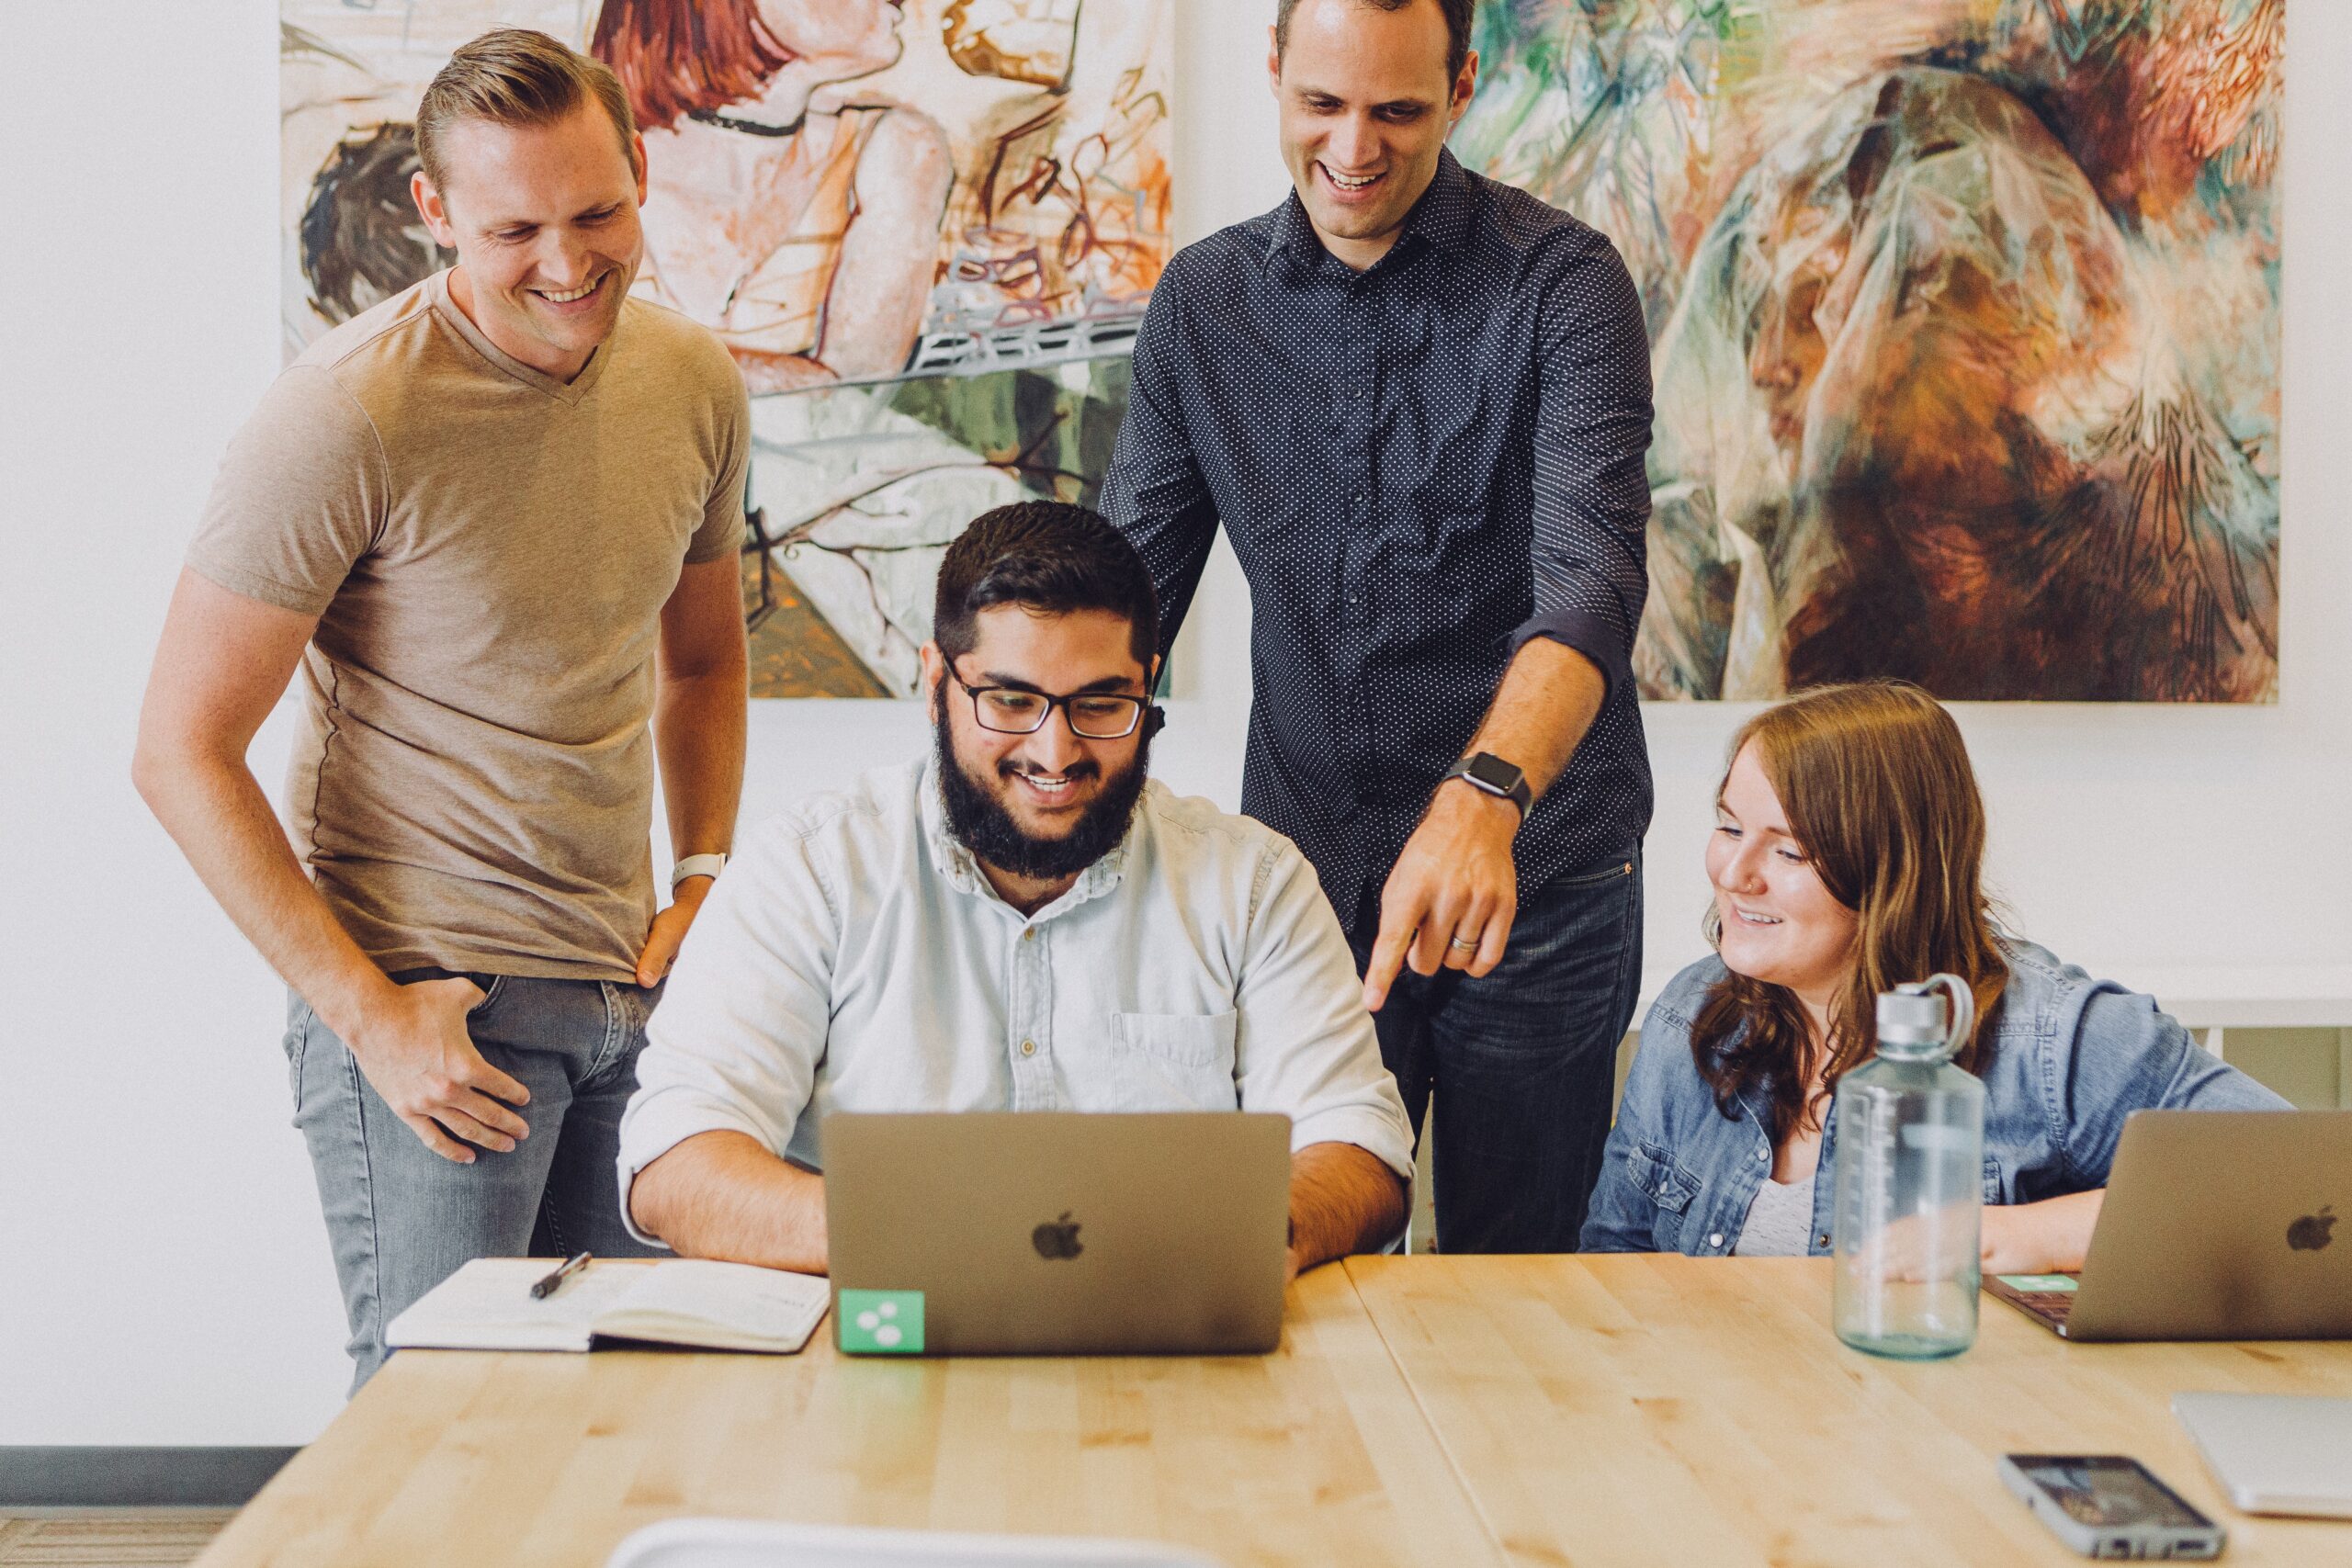 4 people are gathered around a computer smiling, two sat at a large desk, the other two stood behind, one of them pointing to something on the screen. Image represents employee recognition. Image by Jud Mackrill via Unsplash.